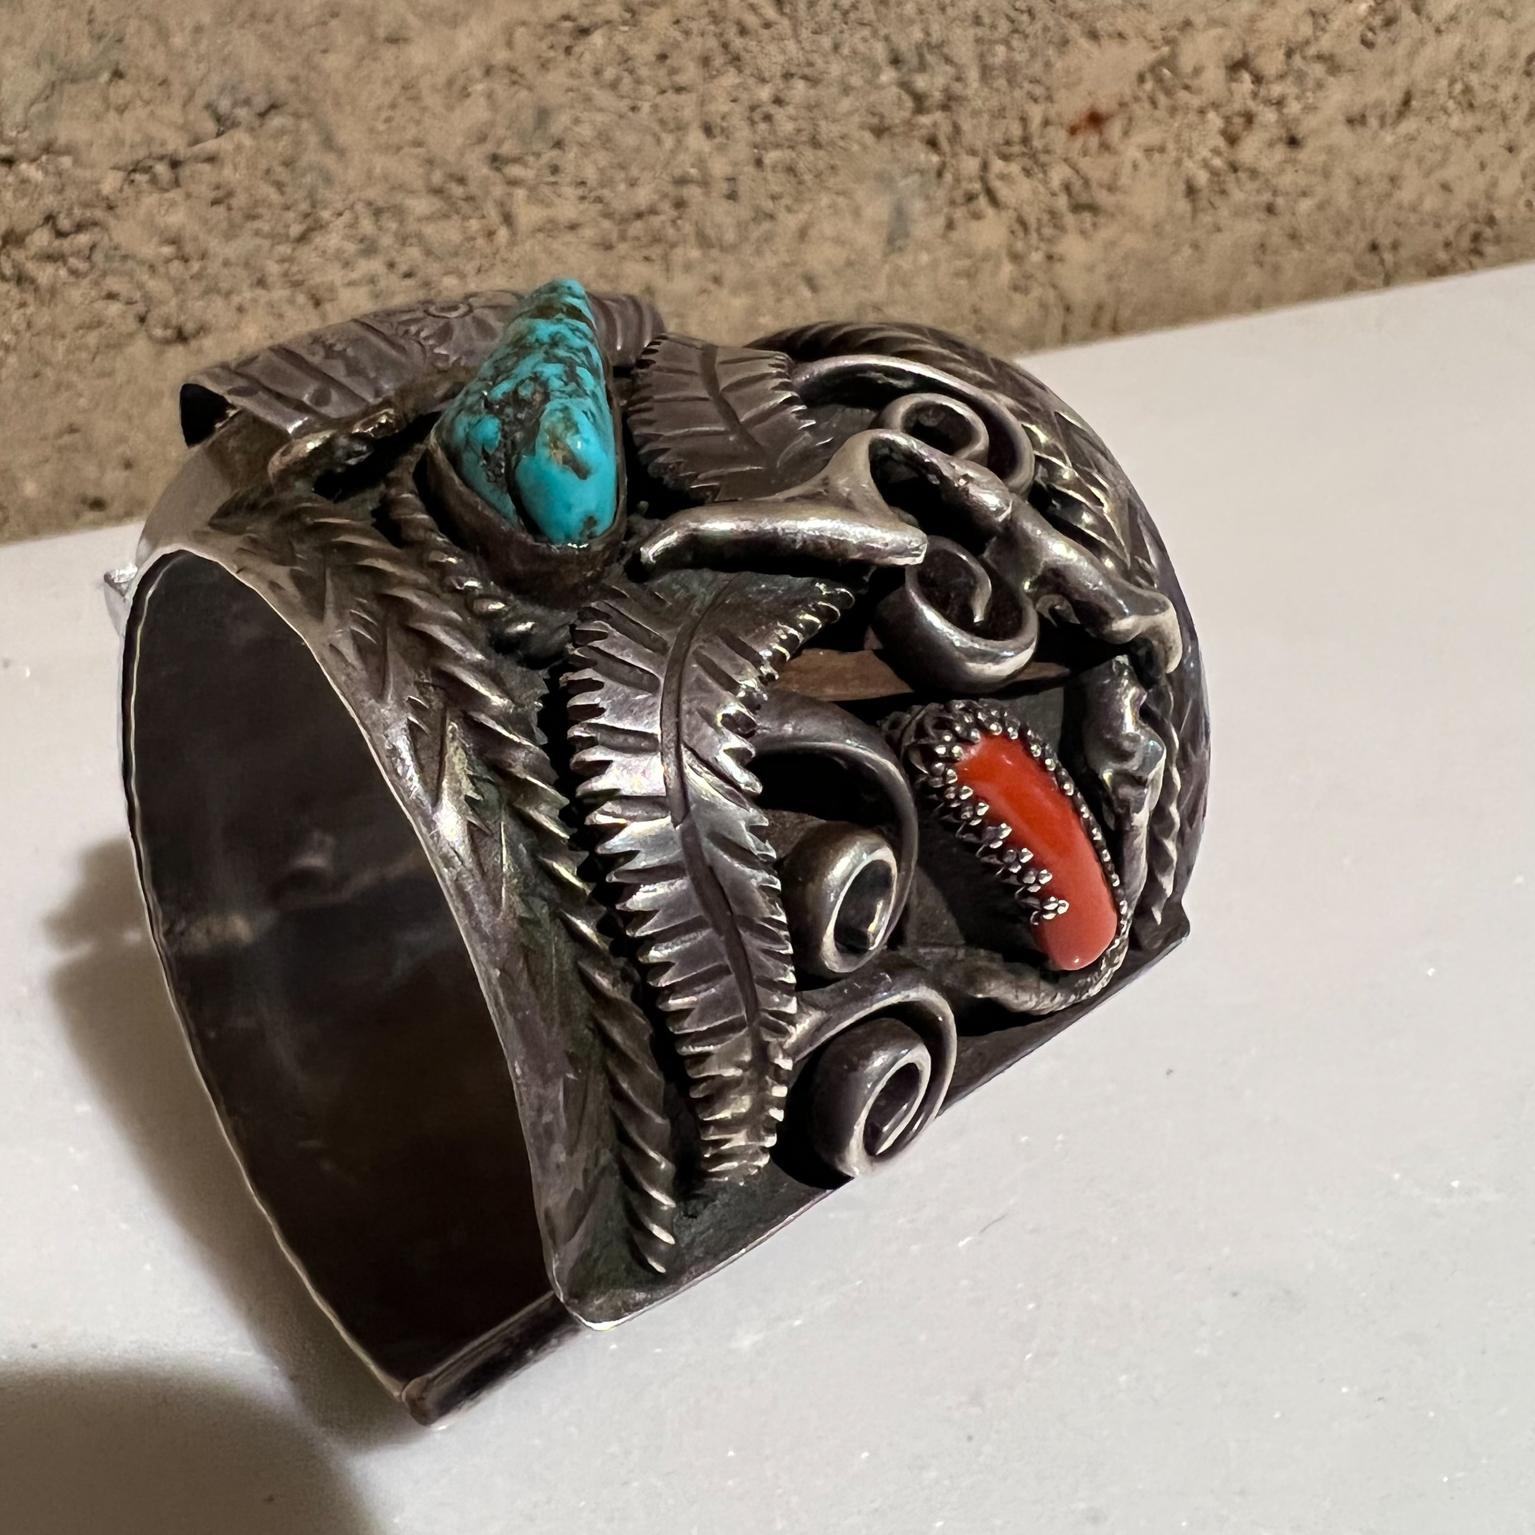 1970s Navajo Southwestern Silver and Stone Decorative Cuff Bracelet Watch Band In Good Condition For Sale In Chula Vista, CA